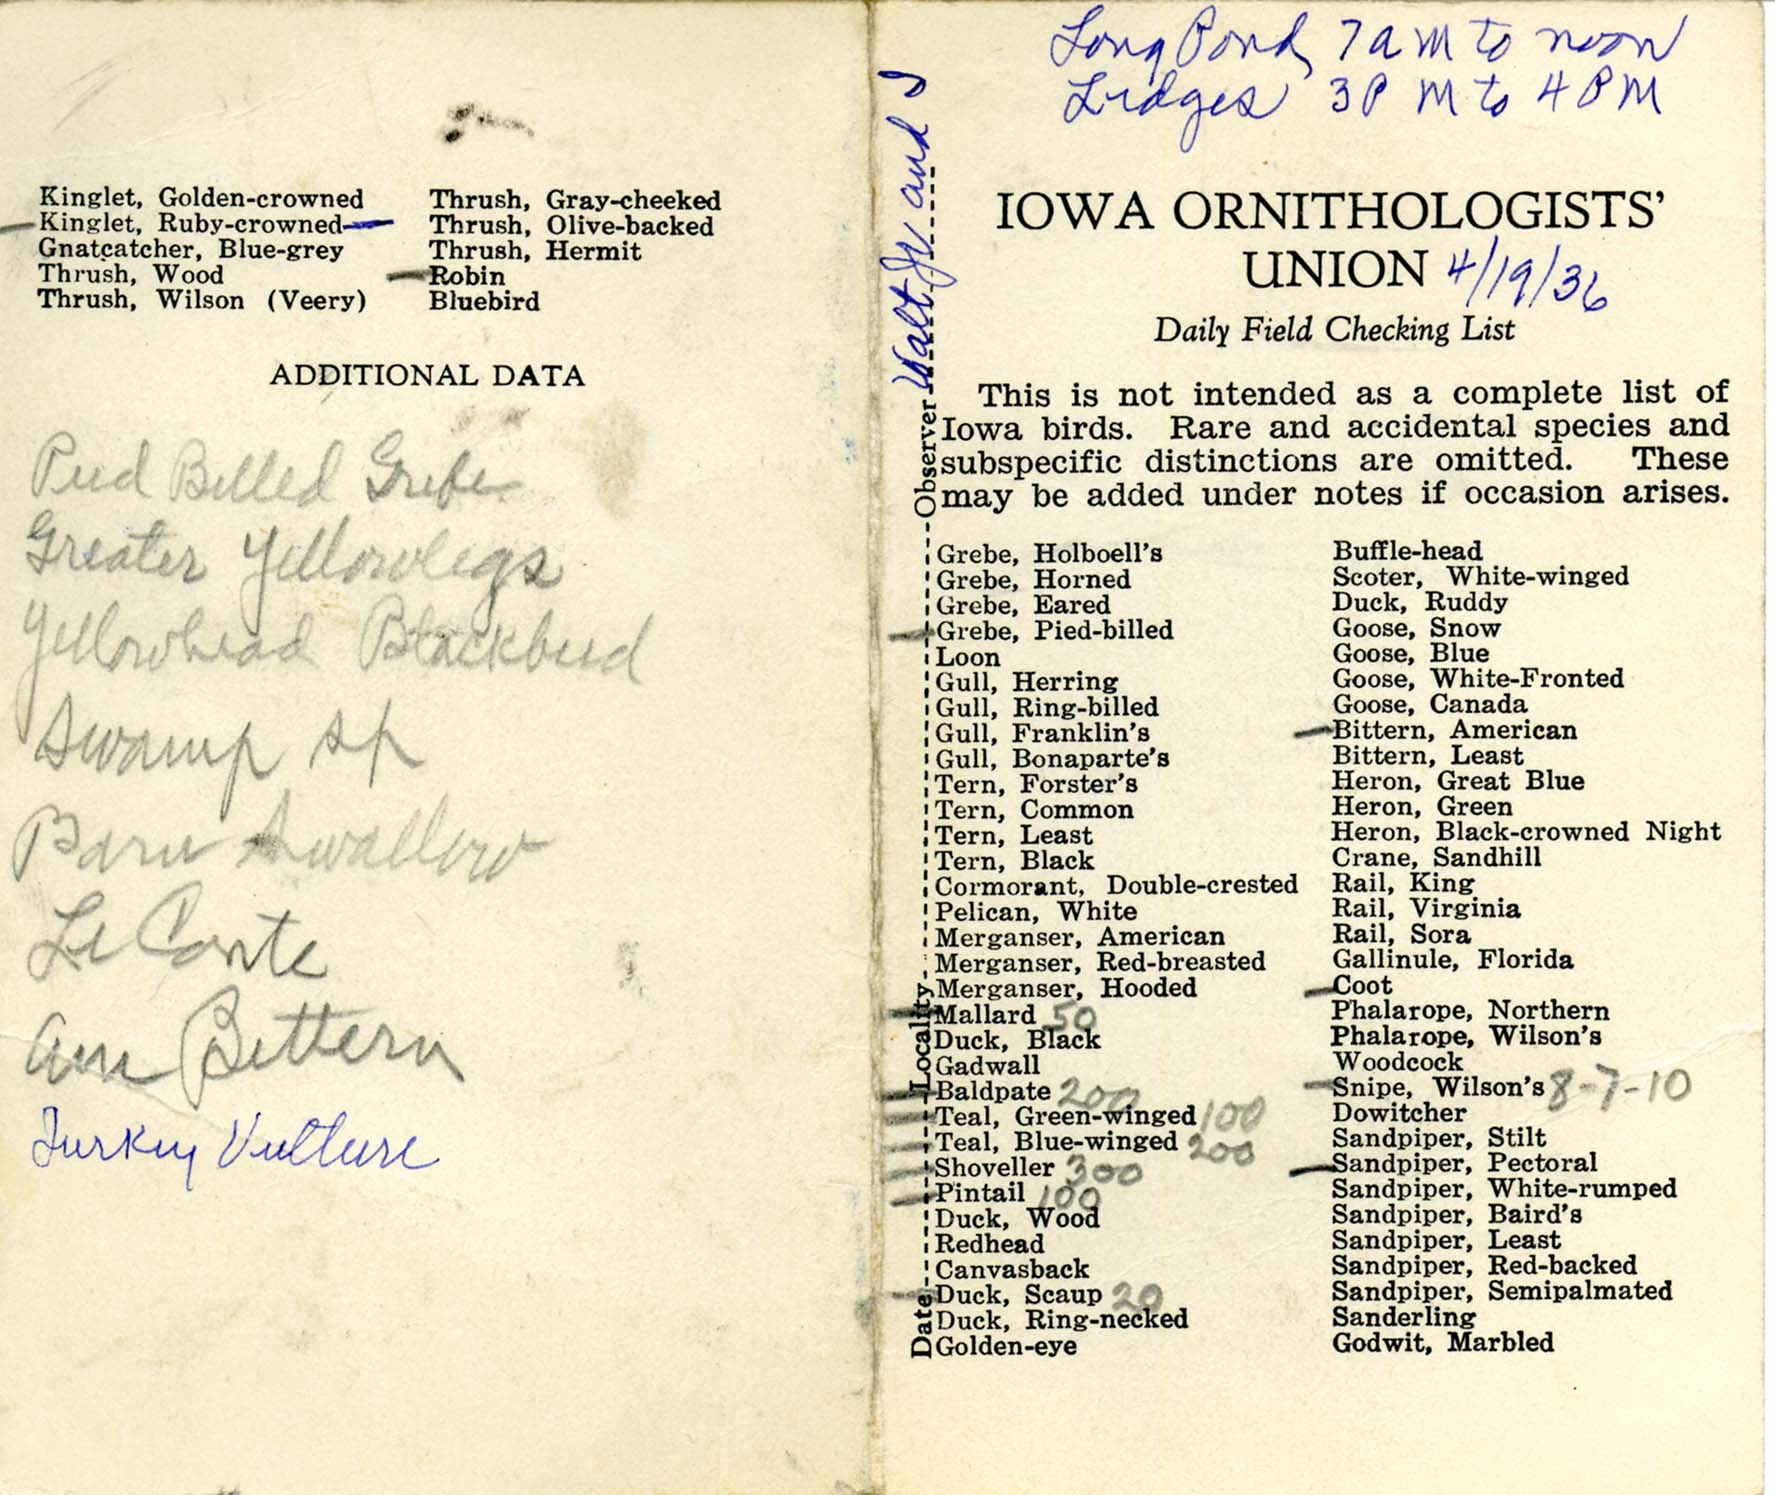 Daily field checking list by Walter Rosene, April 19, 1936